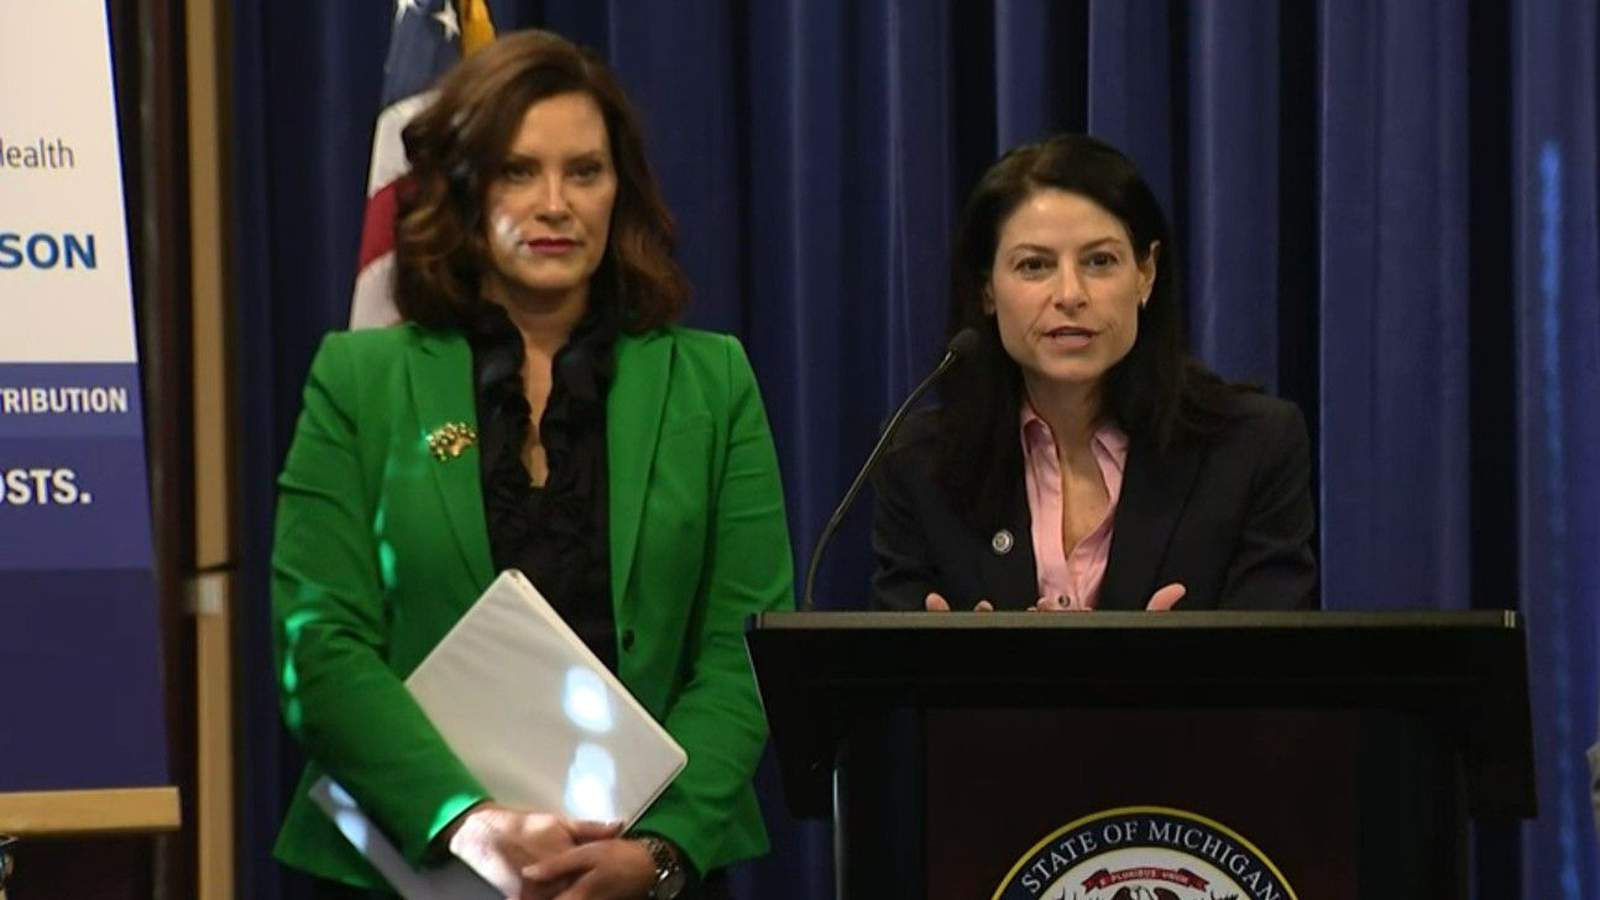 Watch Live: Gov. Whitmer, AG Nessel to discuss federal relief funds for Michigan schools